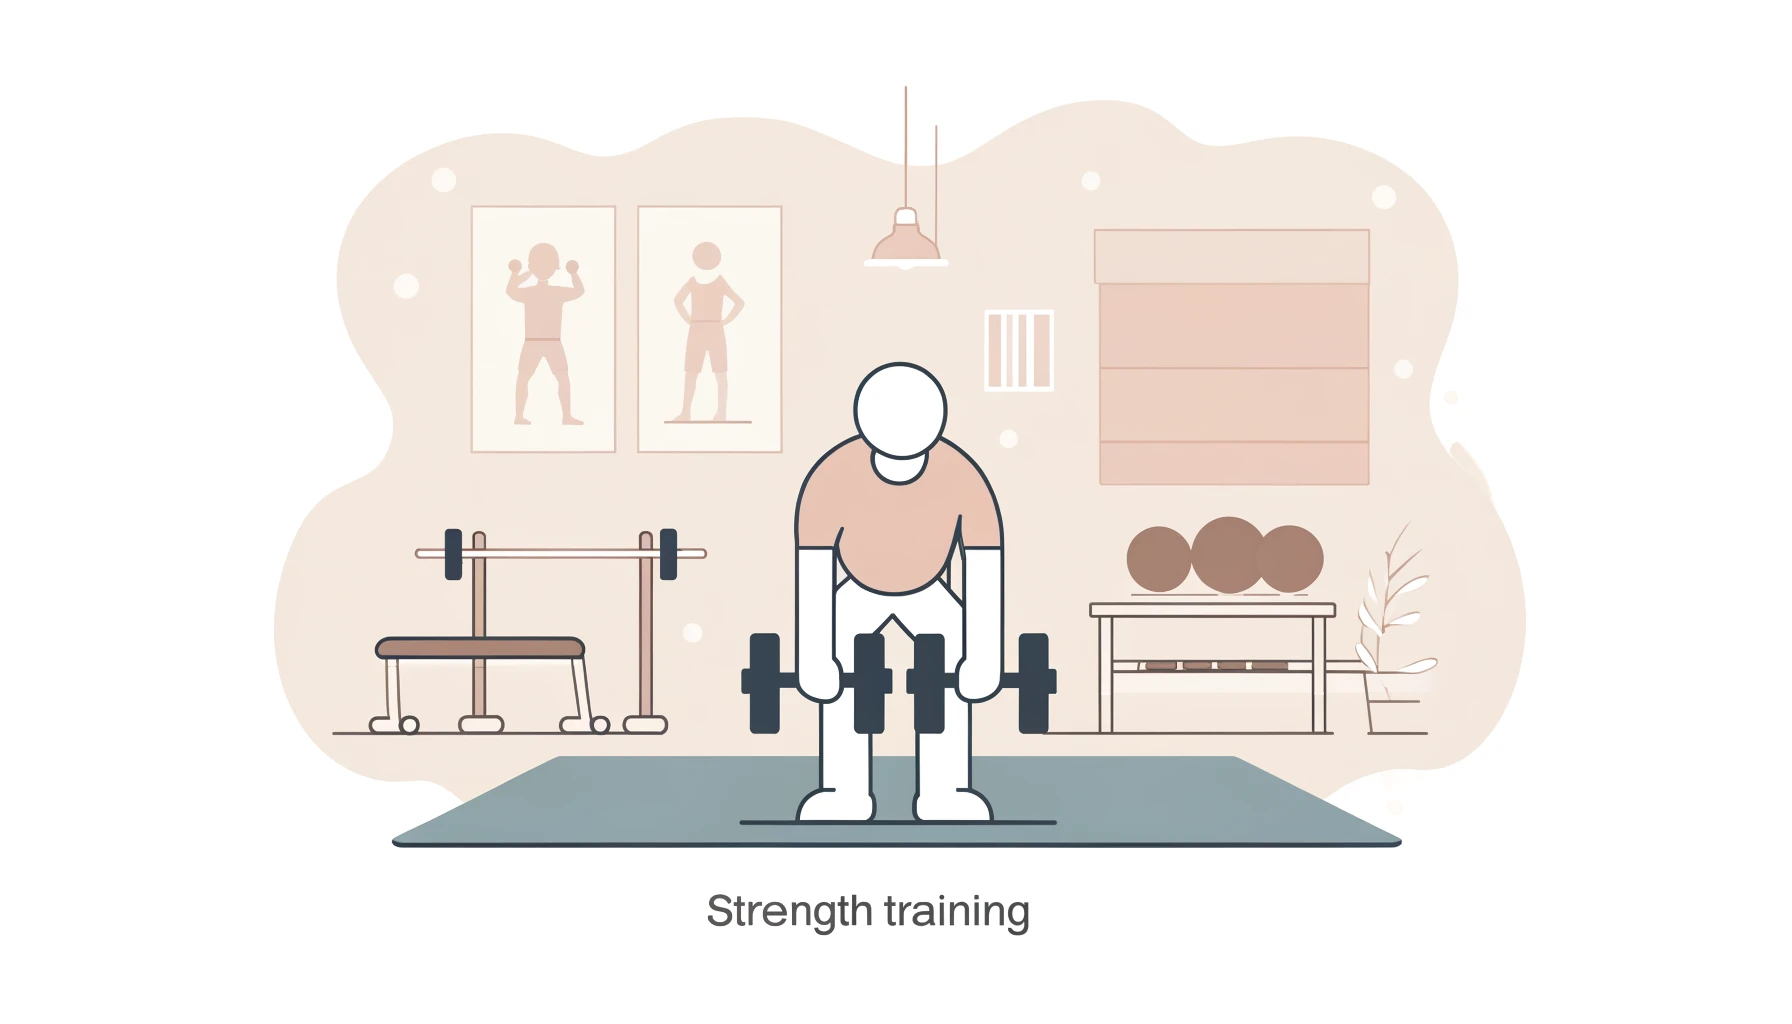 A simple, wide illustration for a blog header, depicting the theme 'Strength Training for Beginners'. The image should feature a person of ambiguous gender, possibly a novice, engaging in a basic strength training exercise such as lifting light dumbbells. The setting should be a gym, portrayed in a simplified manner with minimalistic design and soft colors, making it welcoming and non-intimidating for beginners. The illustration should clearly communicate the concept of starting strength training in a beginner-friendly environment.